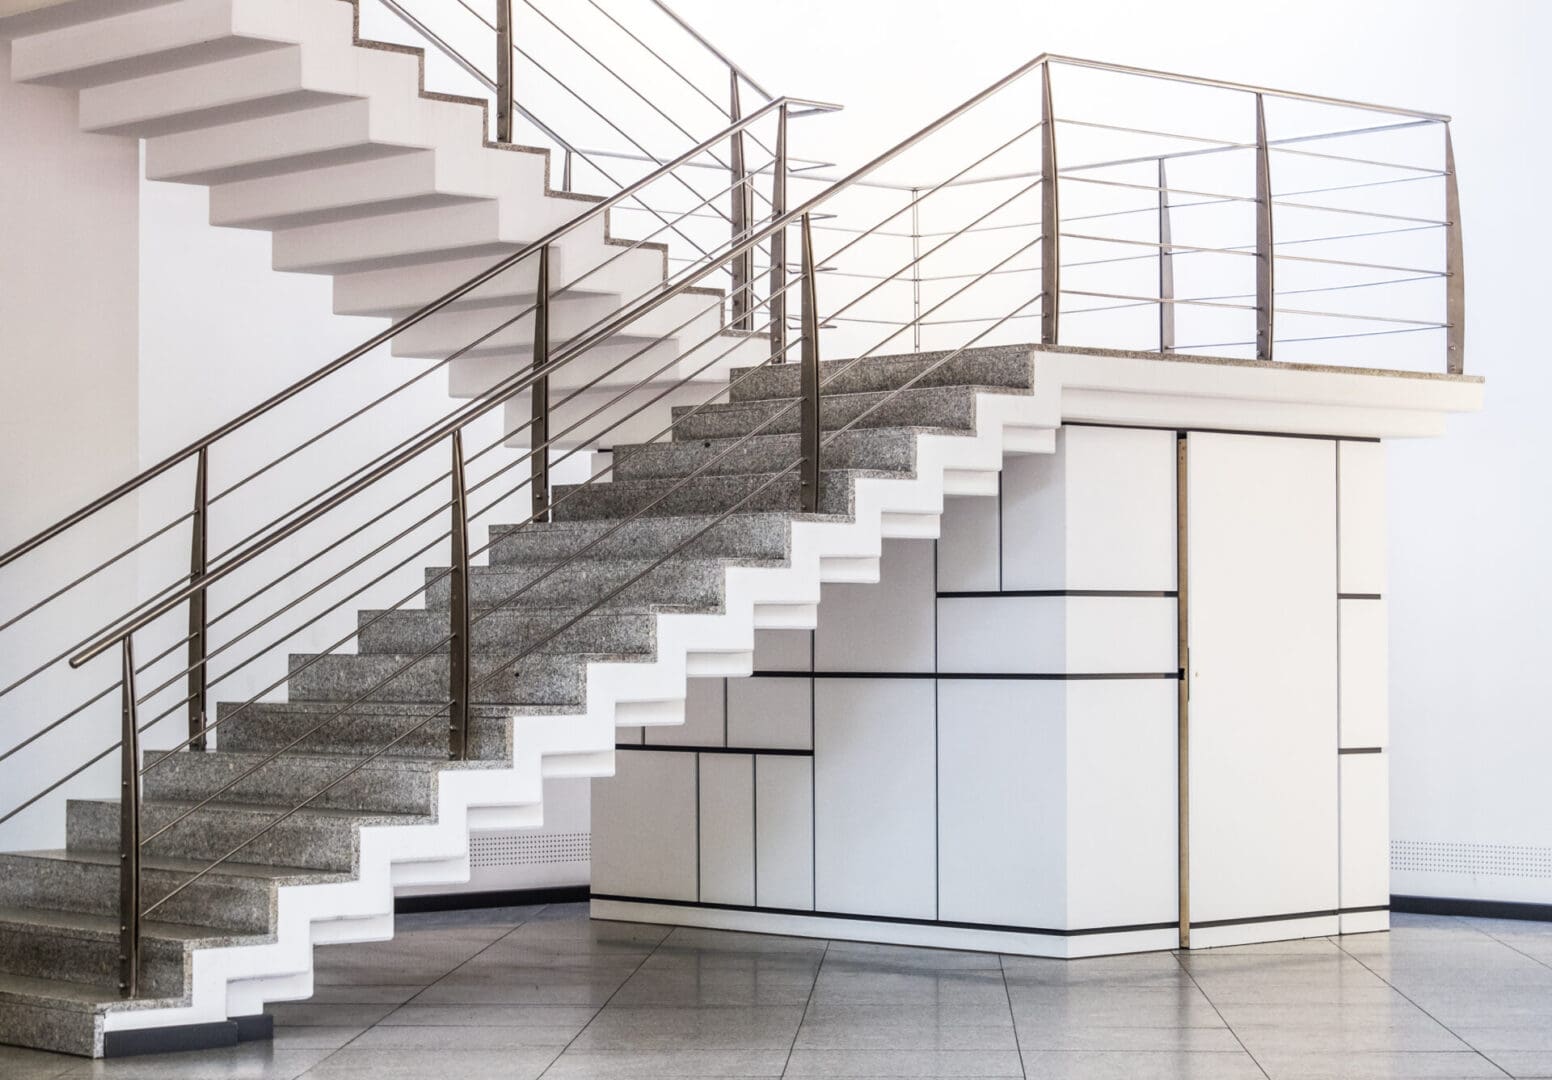 A white staircase with metal railing and steps.